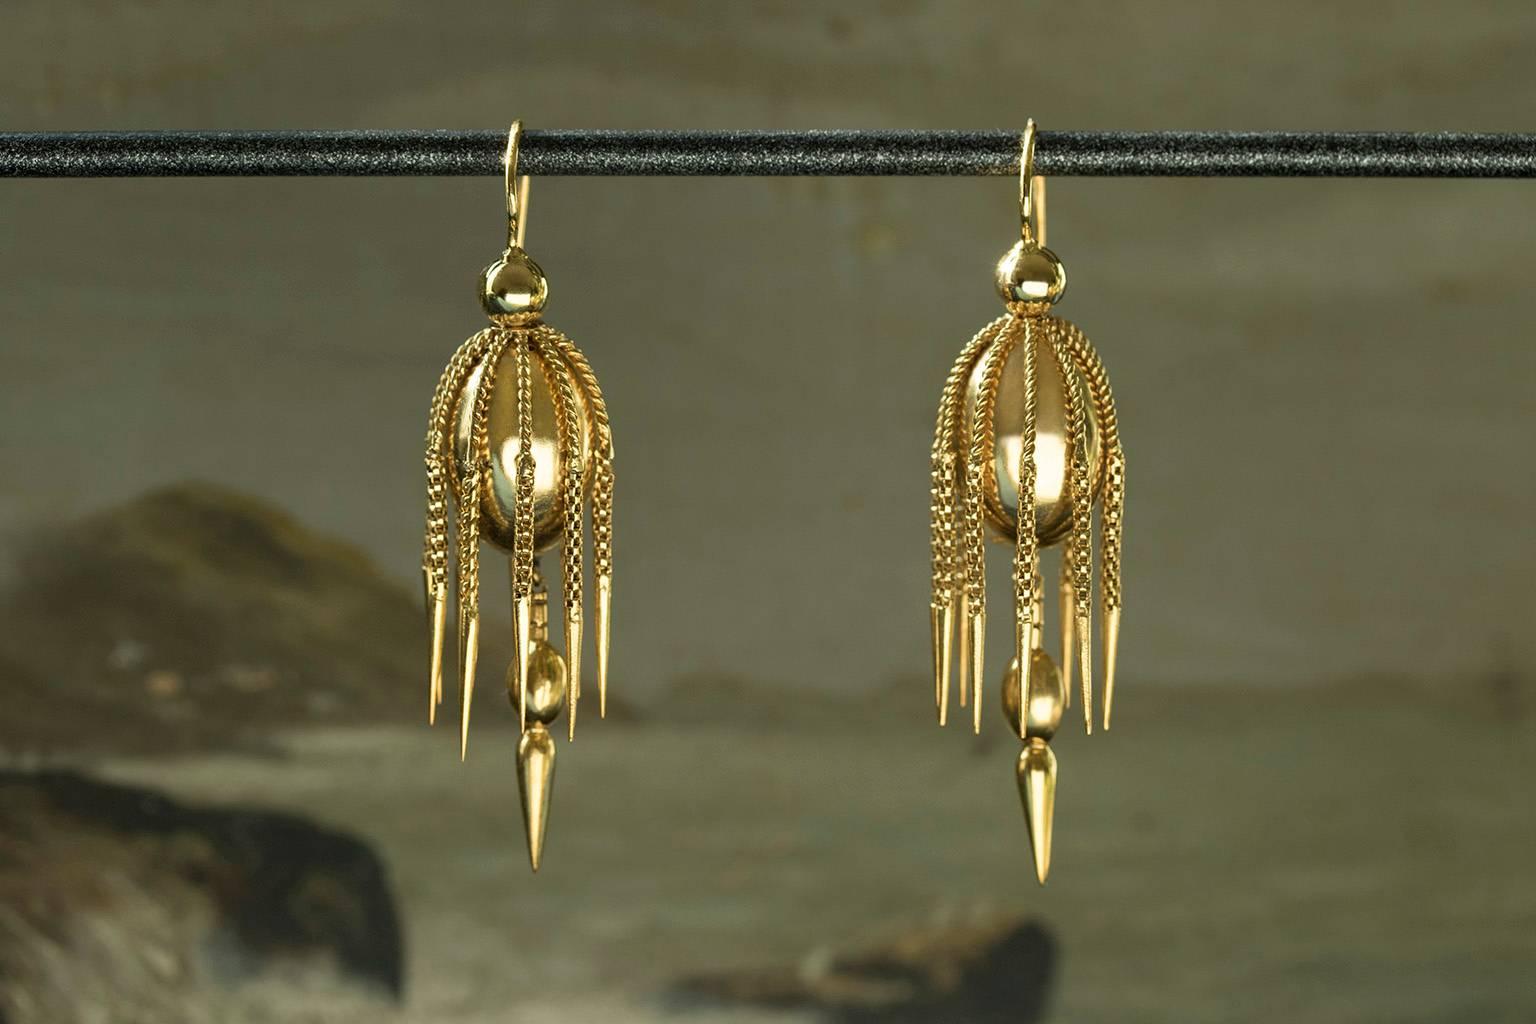 A stunning pair of Victorian gold tassel earrings. Each earring has ten dagger tassels hanging from the gold oval. The center bottom has a larger spear with oval top hanging from the main body of the earring. The earrings are 15k gold including the